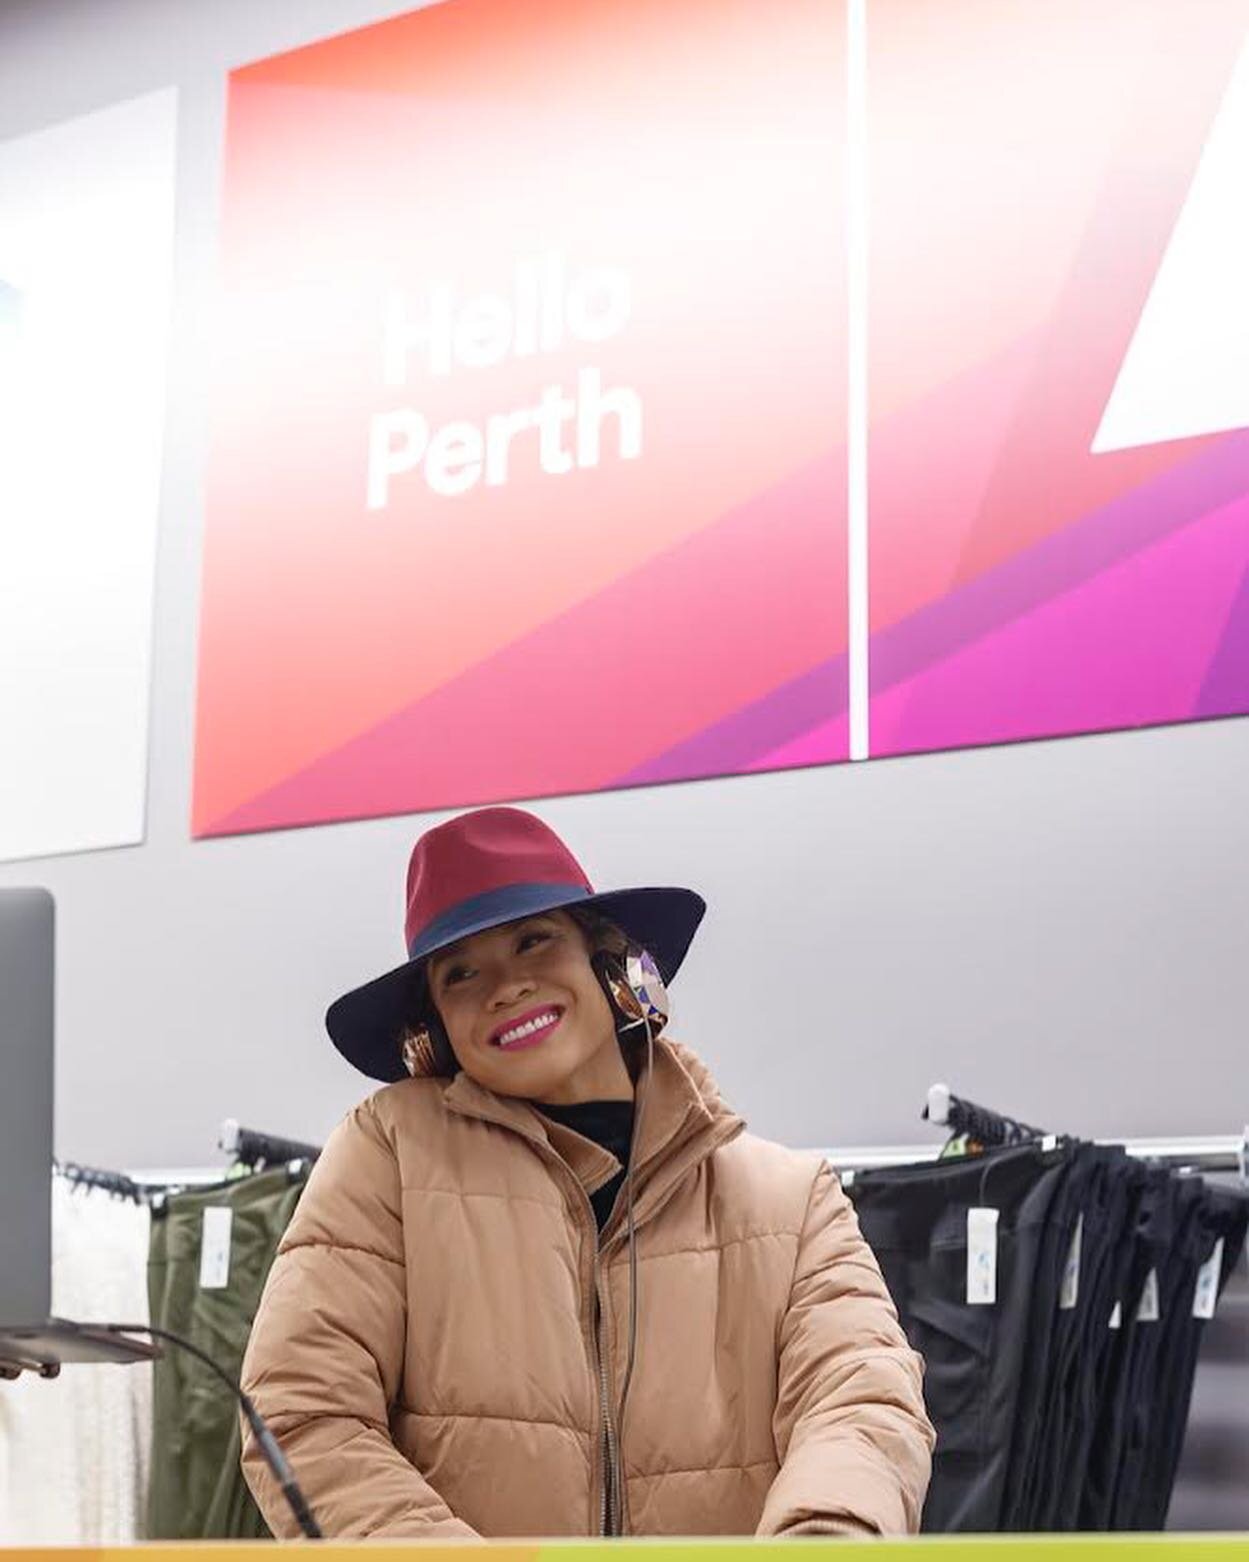 📸 Capturing all the hype around the opening of Kmart Perth. 

Favourite female D.J 🎧@djfadj mixing the sounds.

#perthphotographer #commercialphotographerperth #perthcommercialphotos